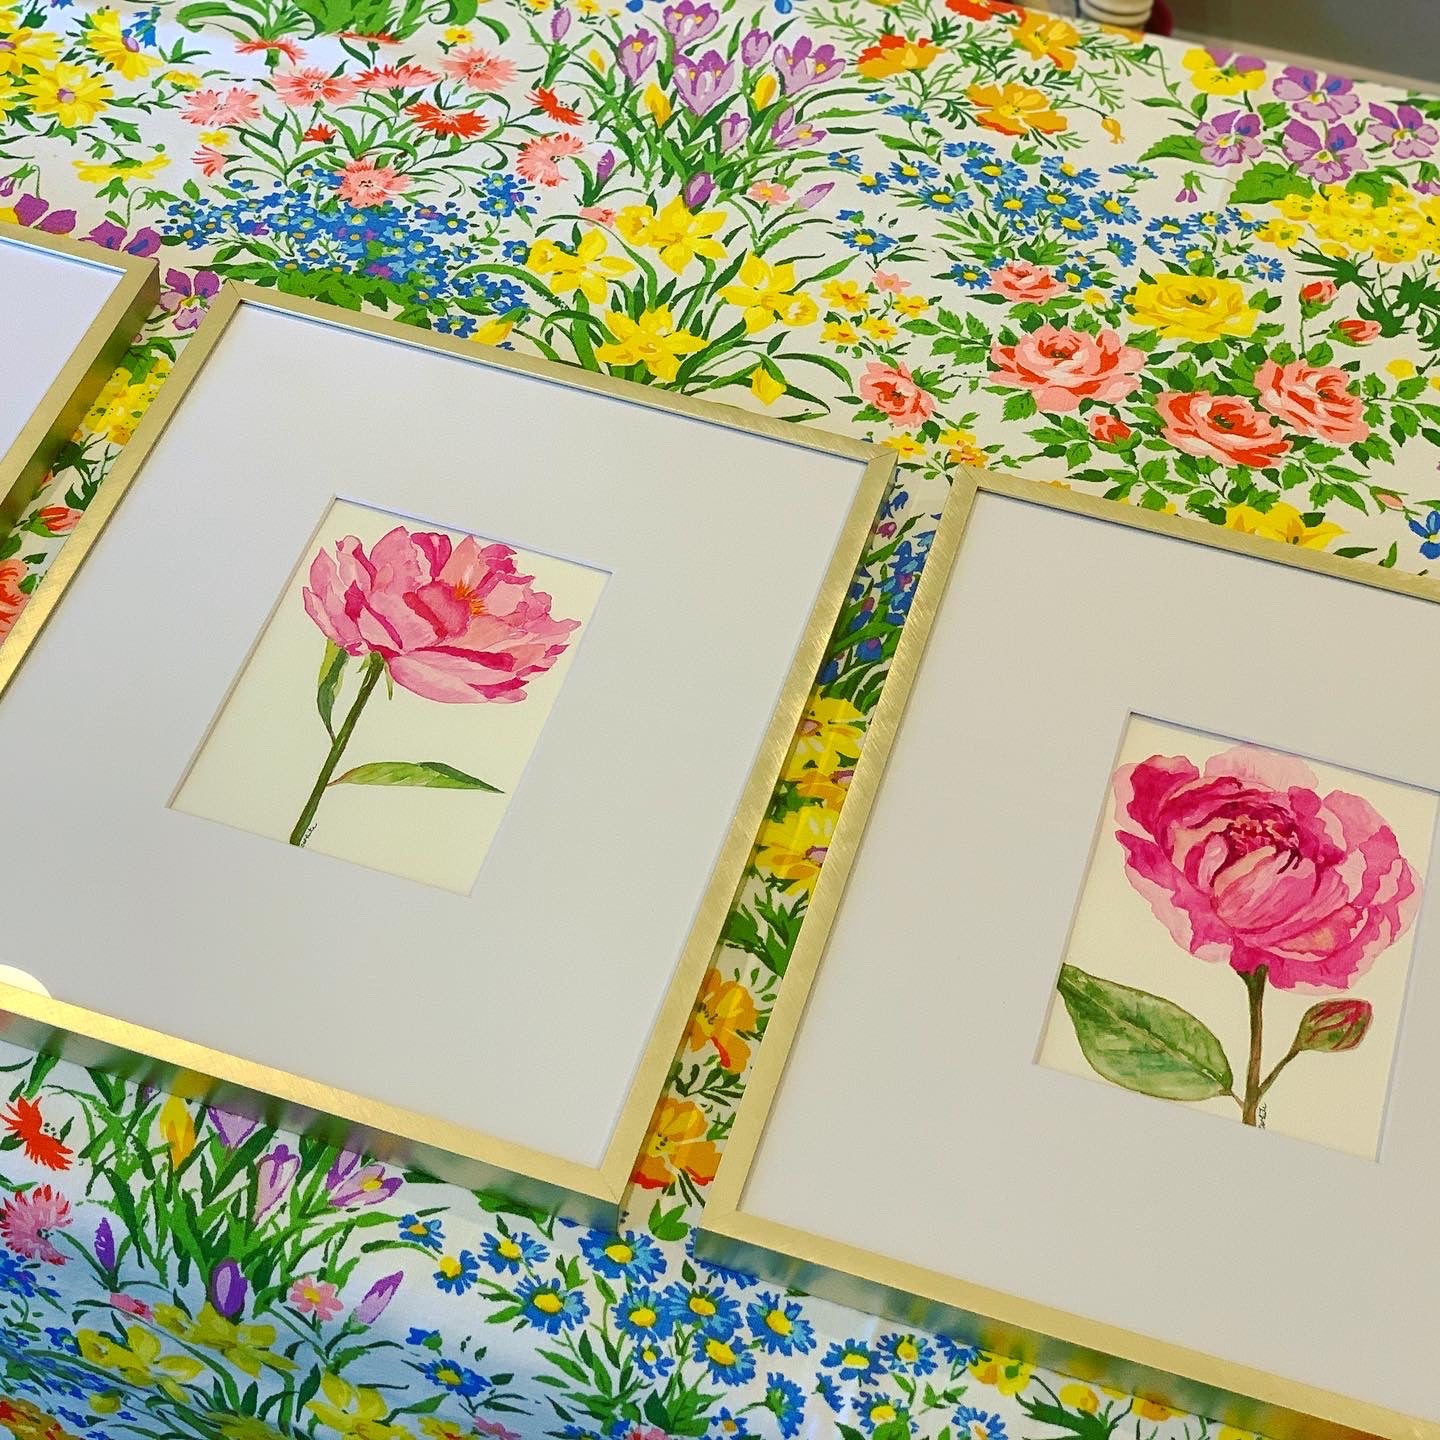 Trio of Pink Peony Watercolors by Catherine White